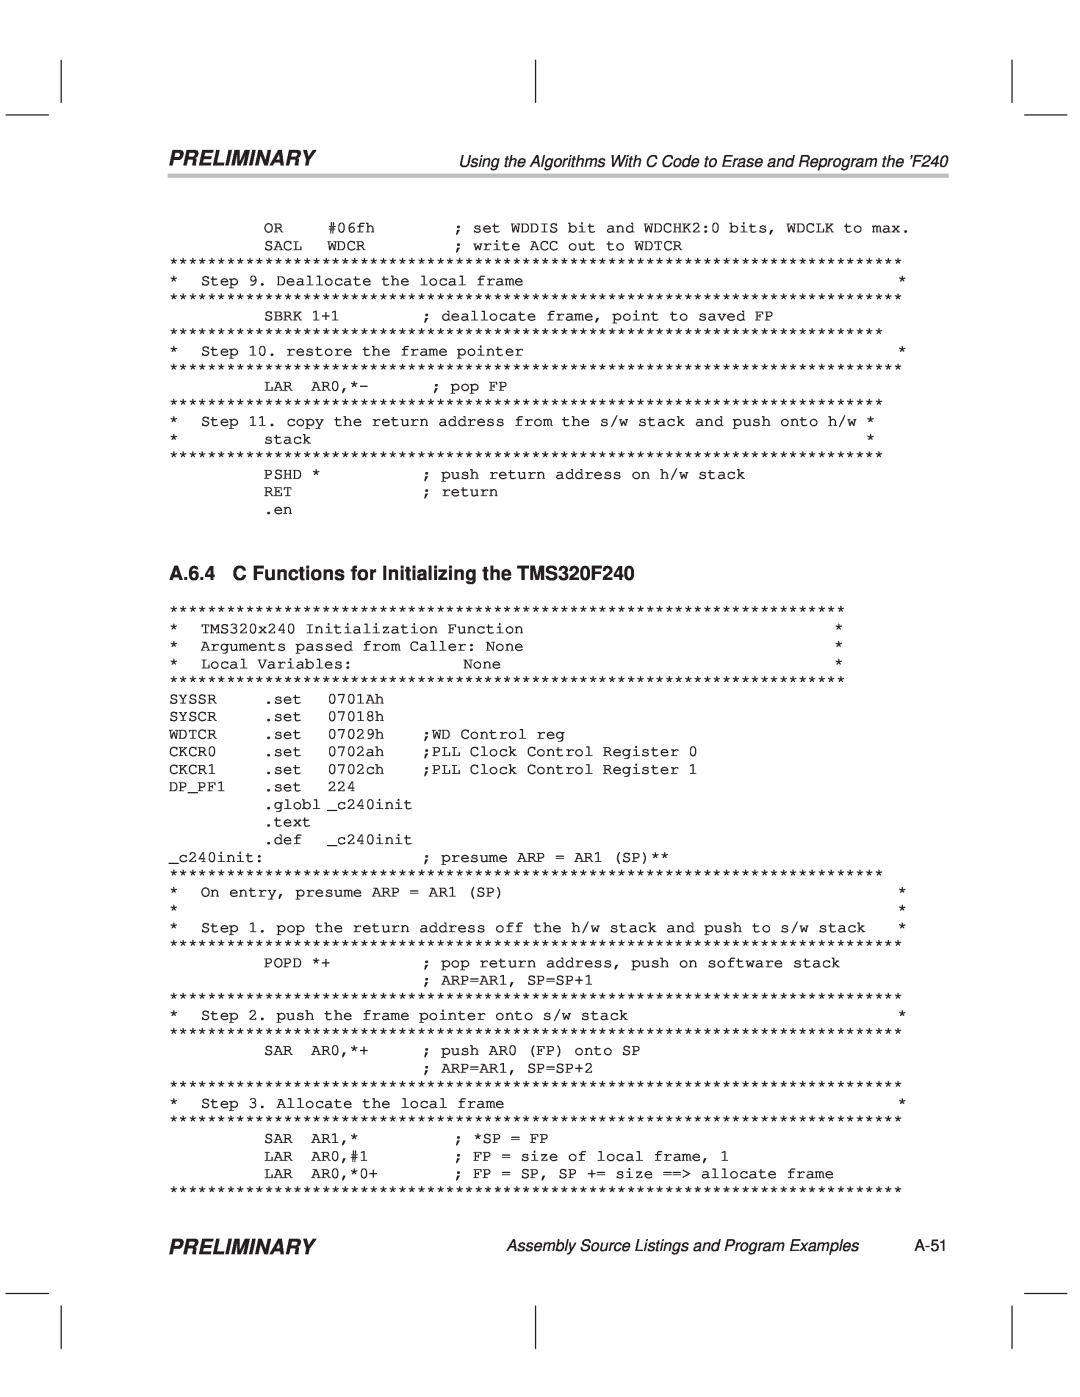 Texas Instruments TMS320F20x/F24x DSP manual A.6.4 C Functions for Initializing the TMS320F240, Preliminary, A-51 